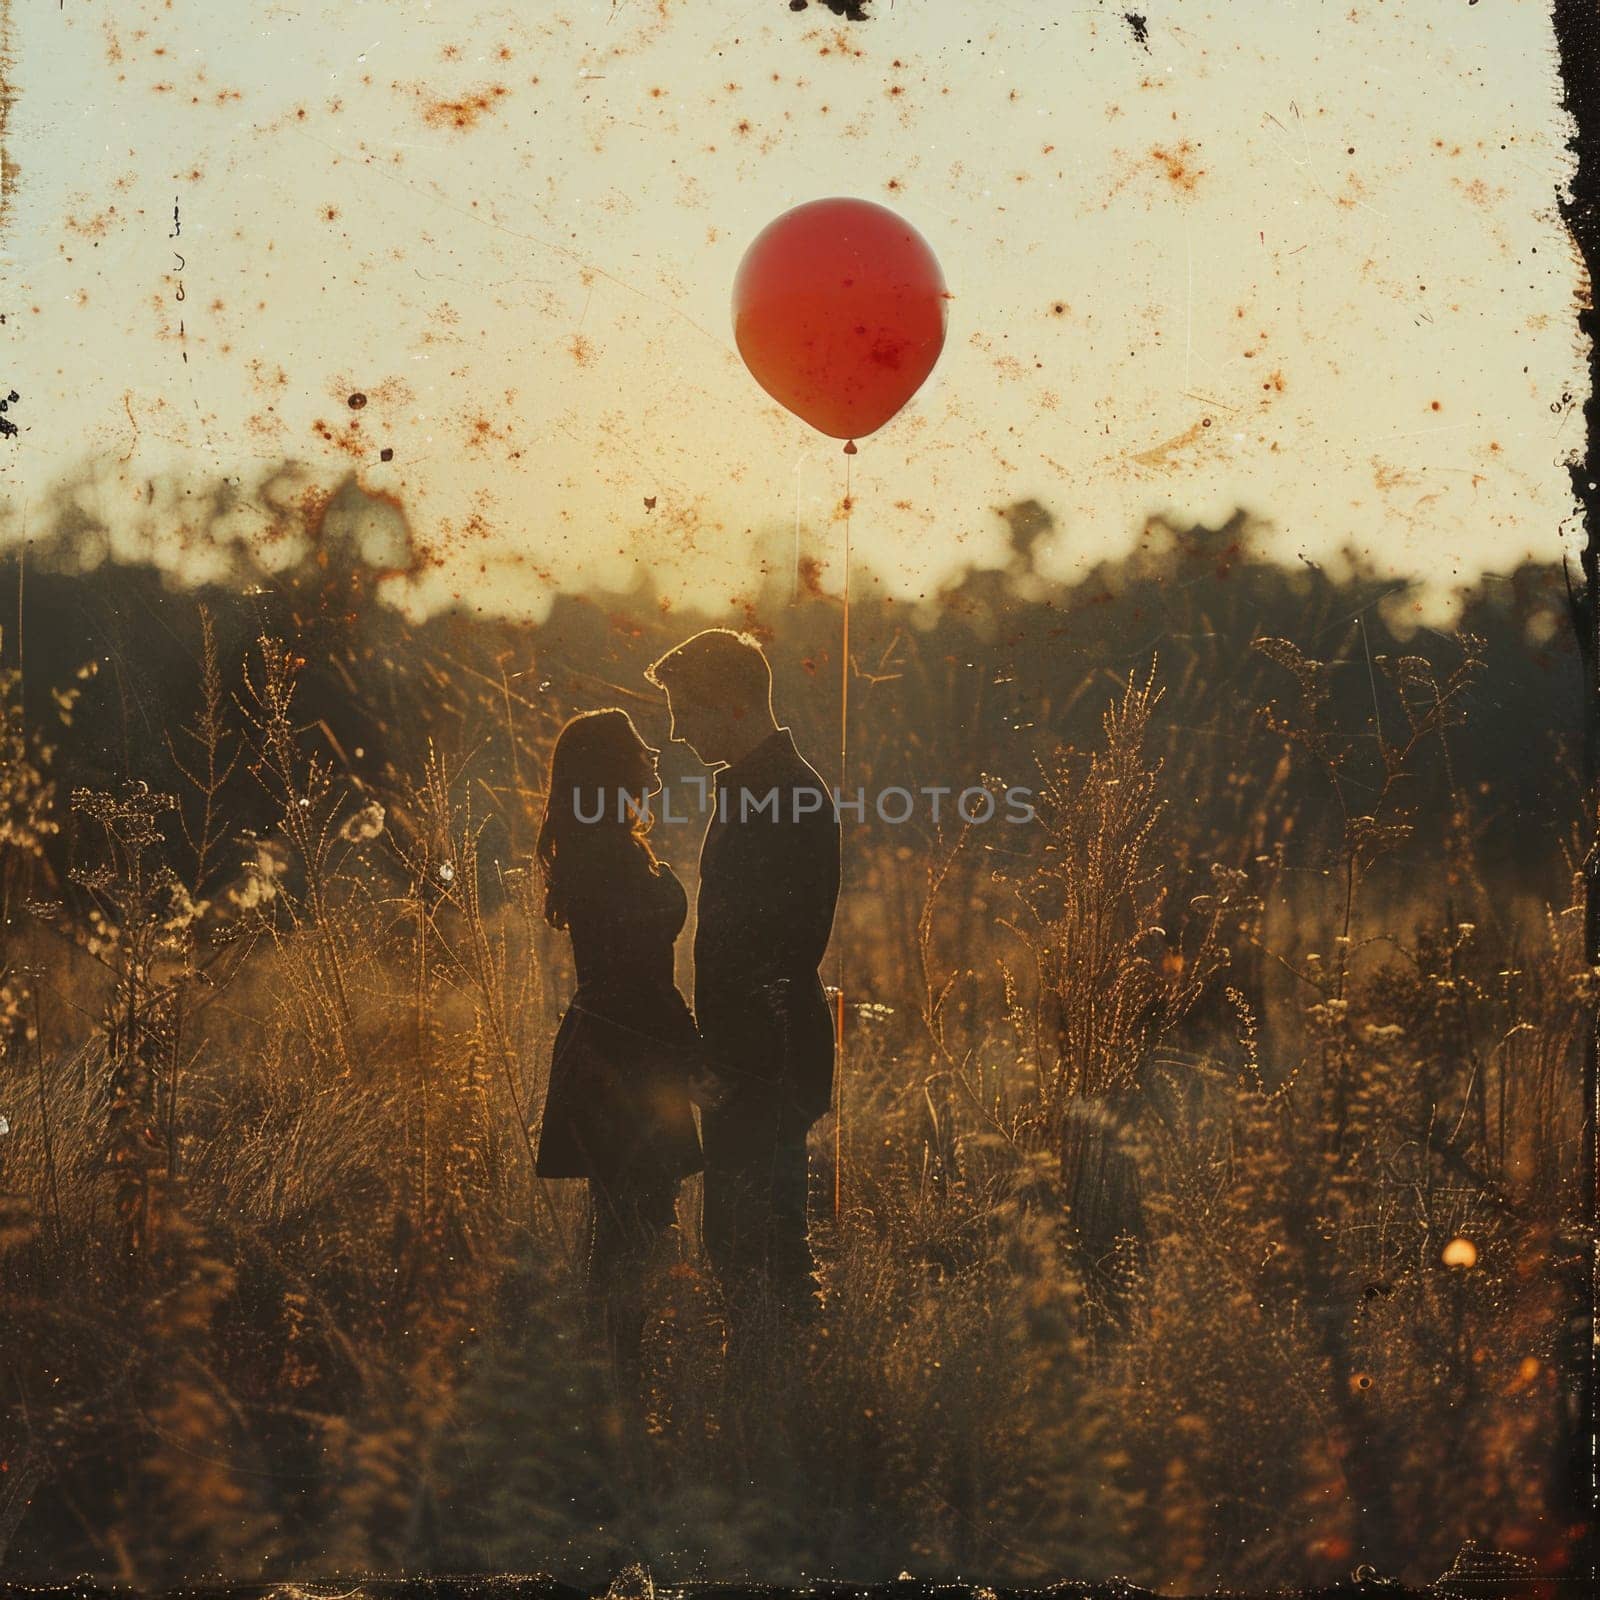 A couple standing closely together in a field, holding a red balloon.